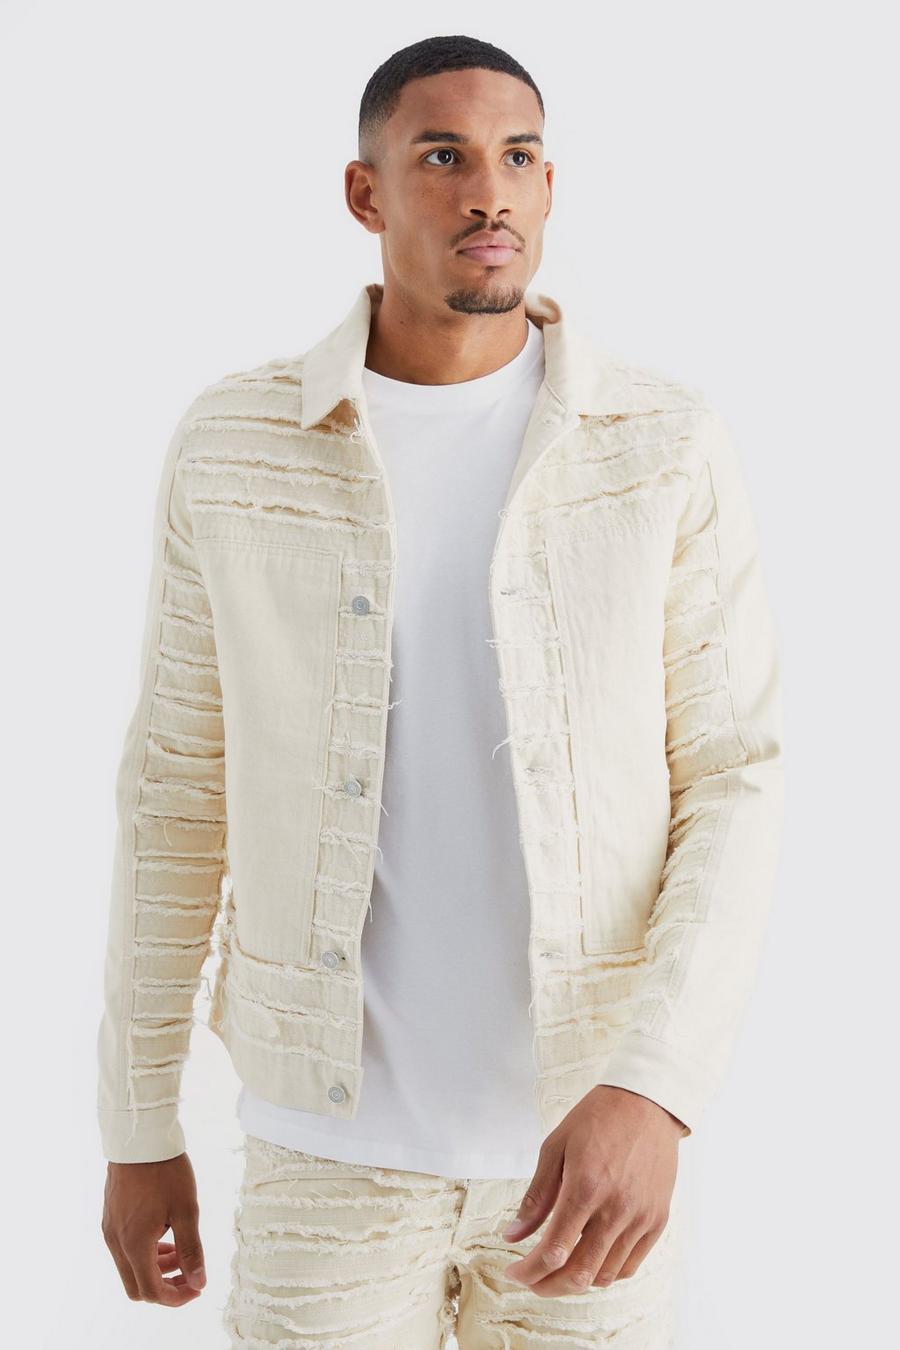 Stone Tall All Over Distressed Denim Jacket